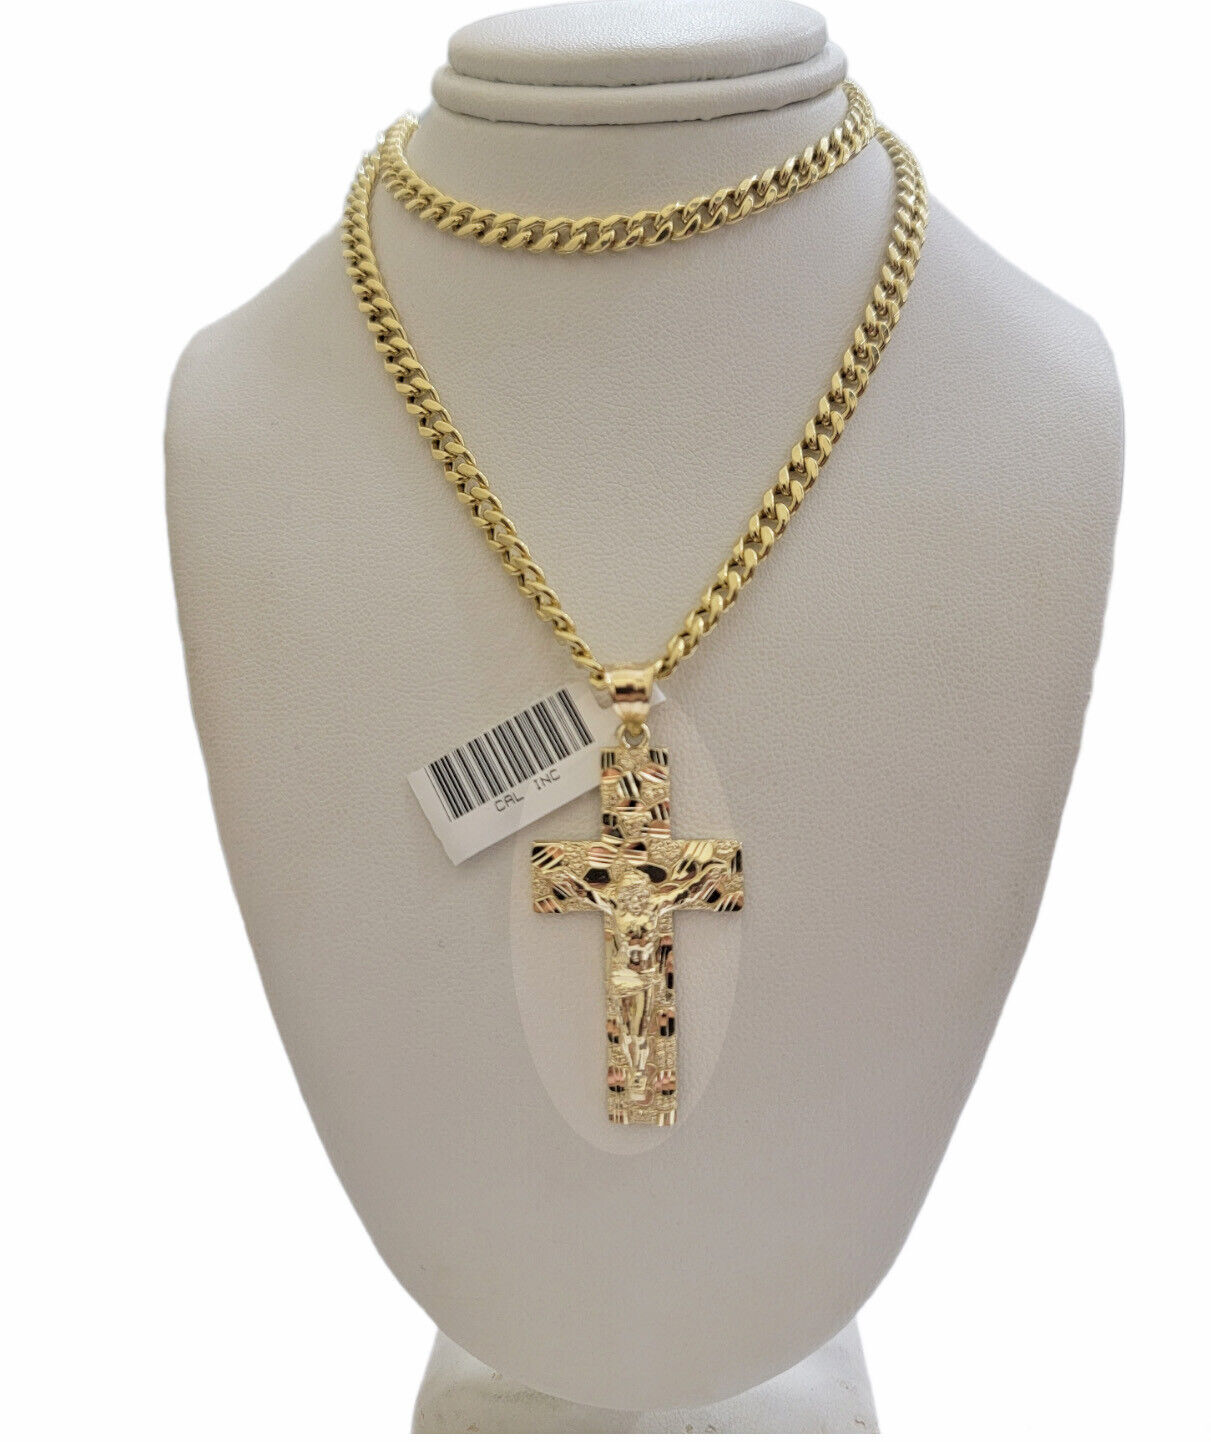 Real 10kt Gold Nugget Charm Pendant &Miami Cuban Link Chain Necklace 5mm 26" SET